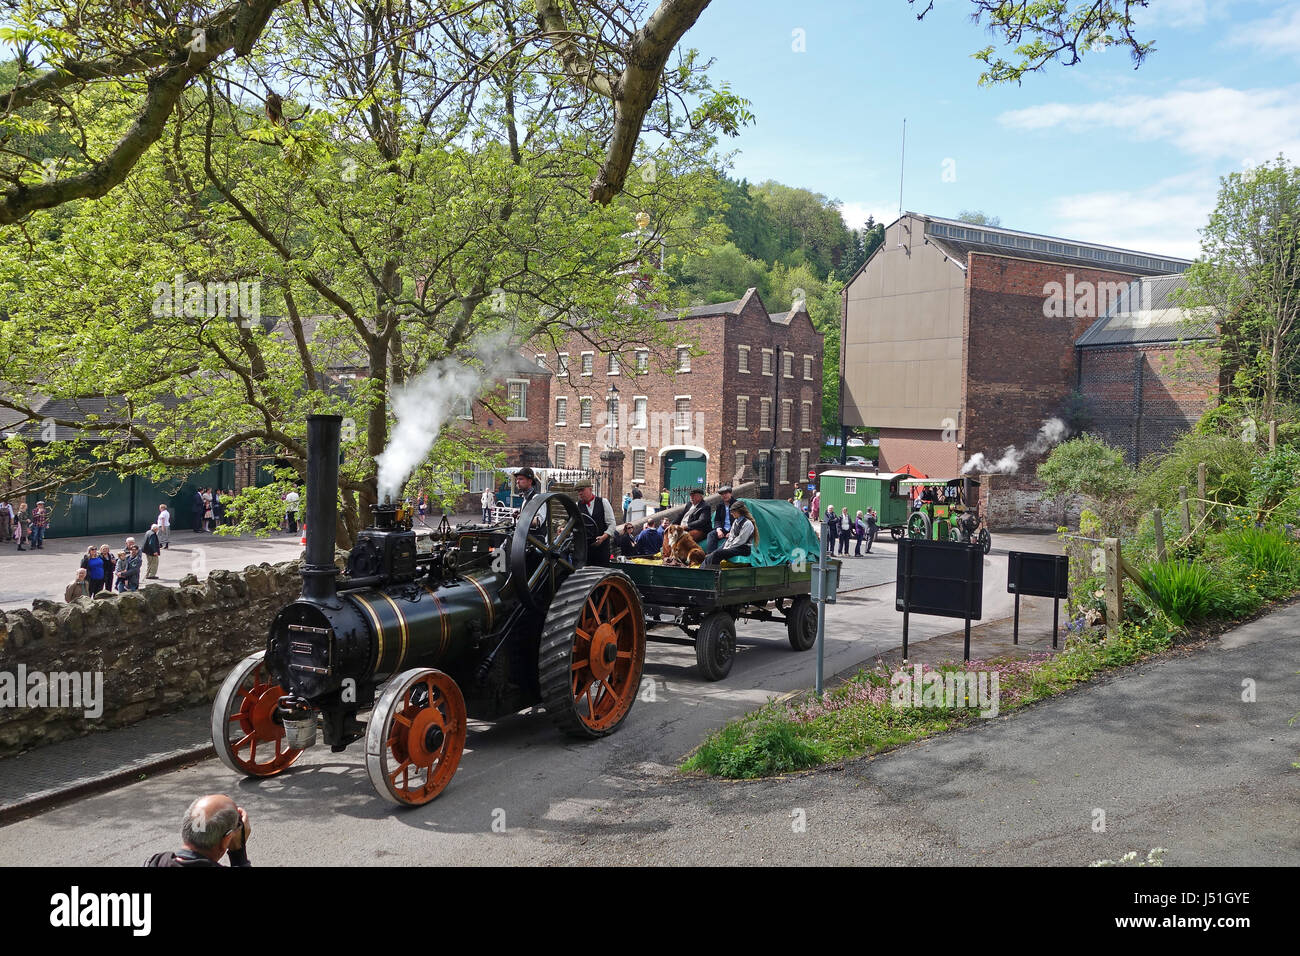 Steam engines at the Museum of Iron in Coalbrookdale part of the Ironbridge Gorge Museums 50th aniversary celebrations. Stock Photo